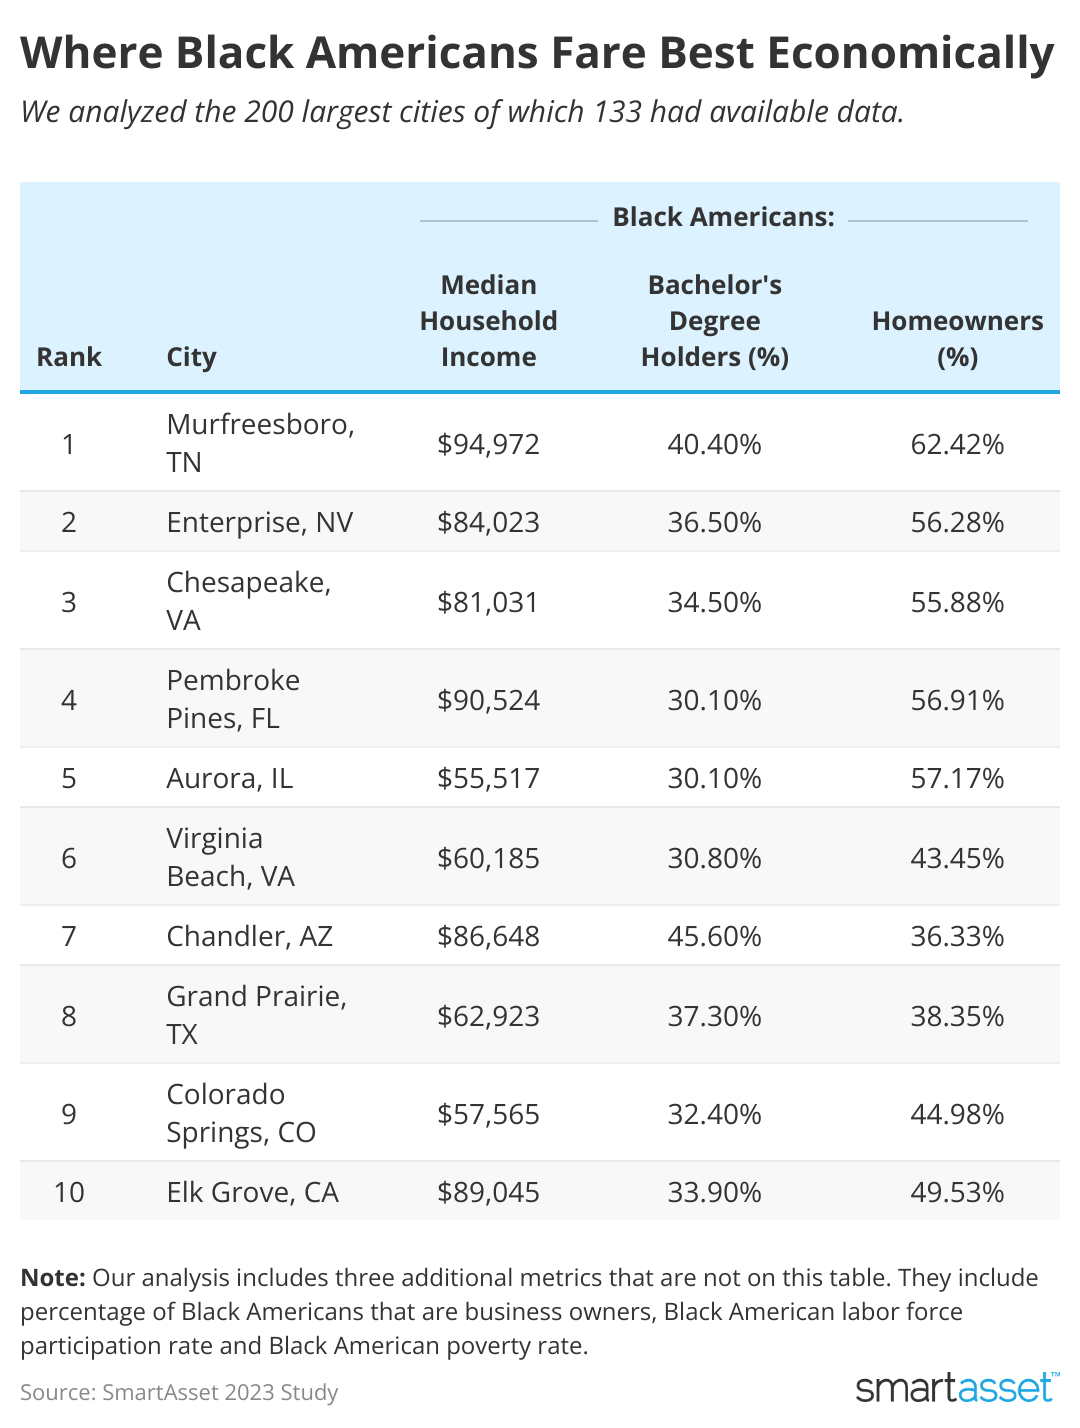 A chart showing the 10 cities where Black Americans fare best economically. 